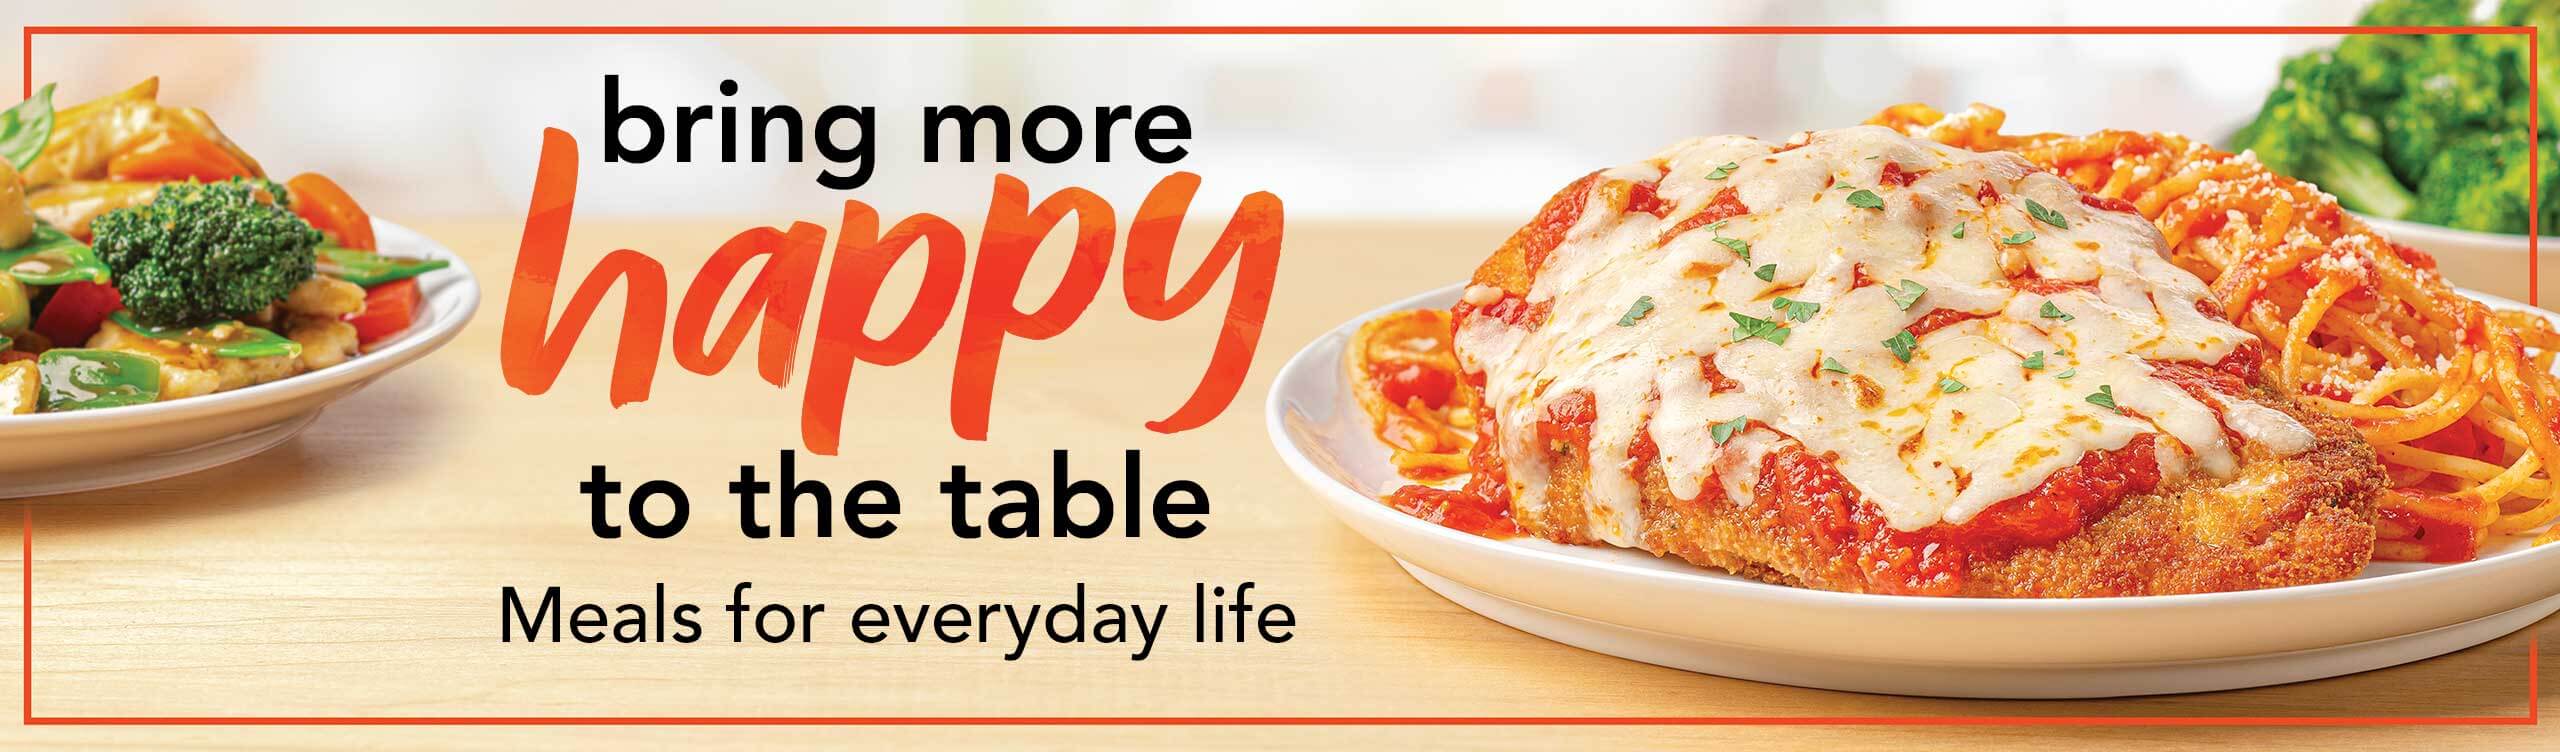 bring more happy to the table